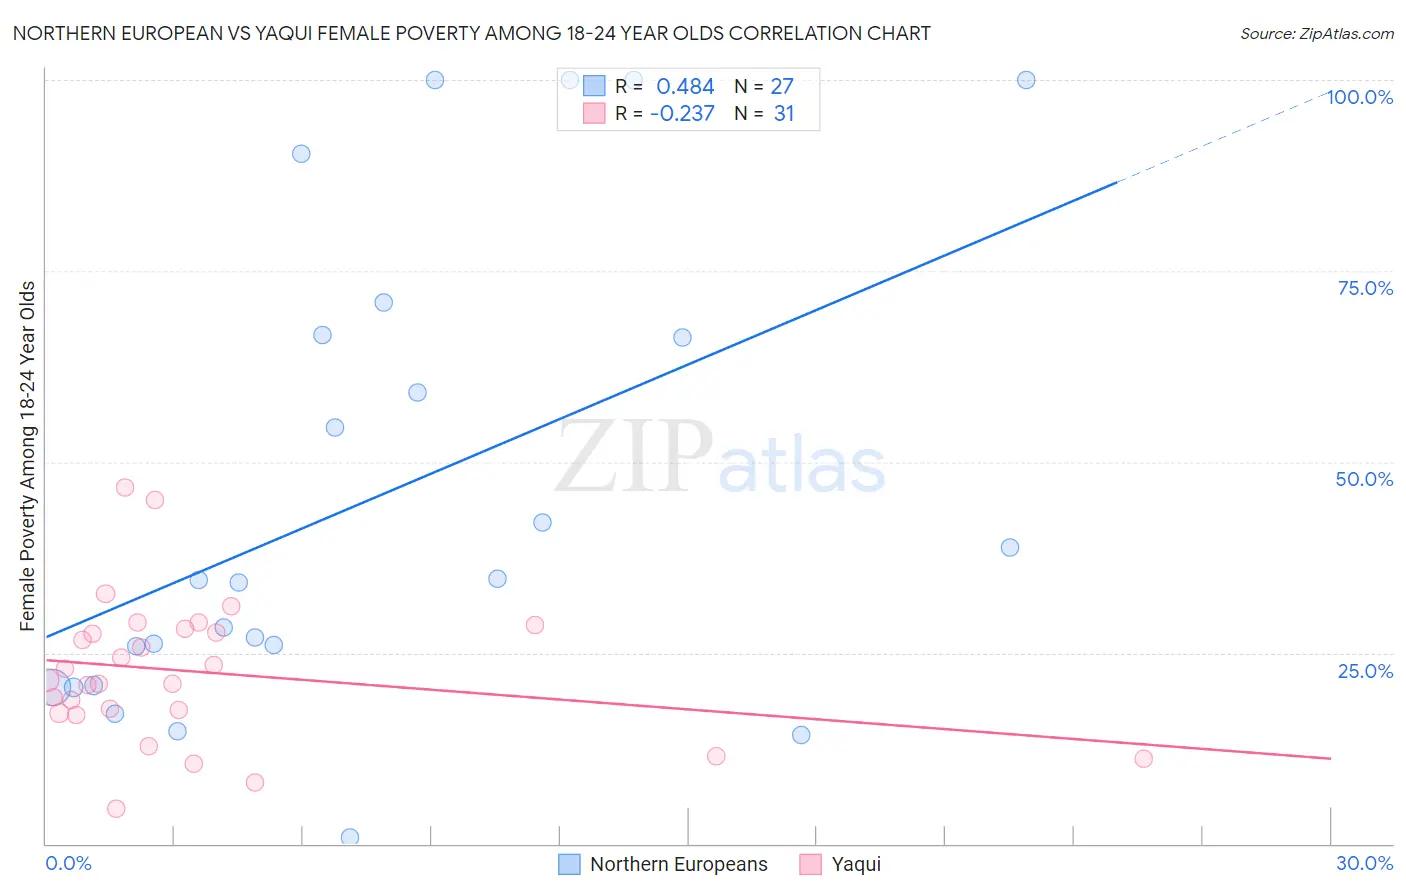 Northern European vs Yaqui Female Poverty Among 18-24 Year Olds